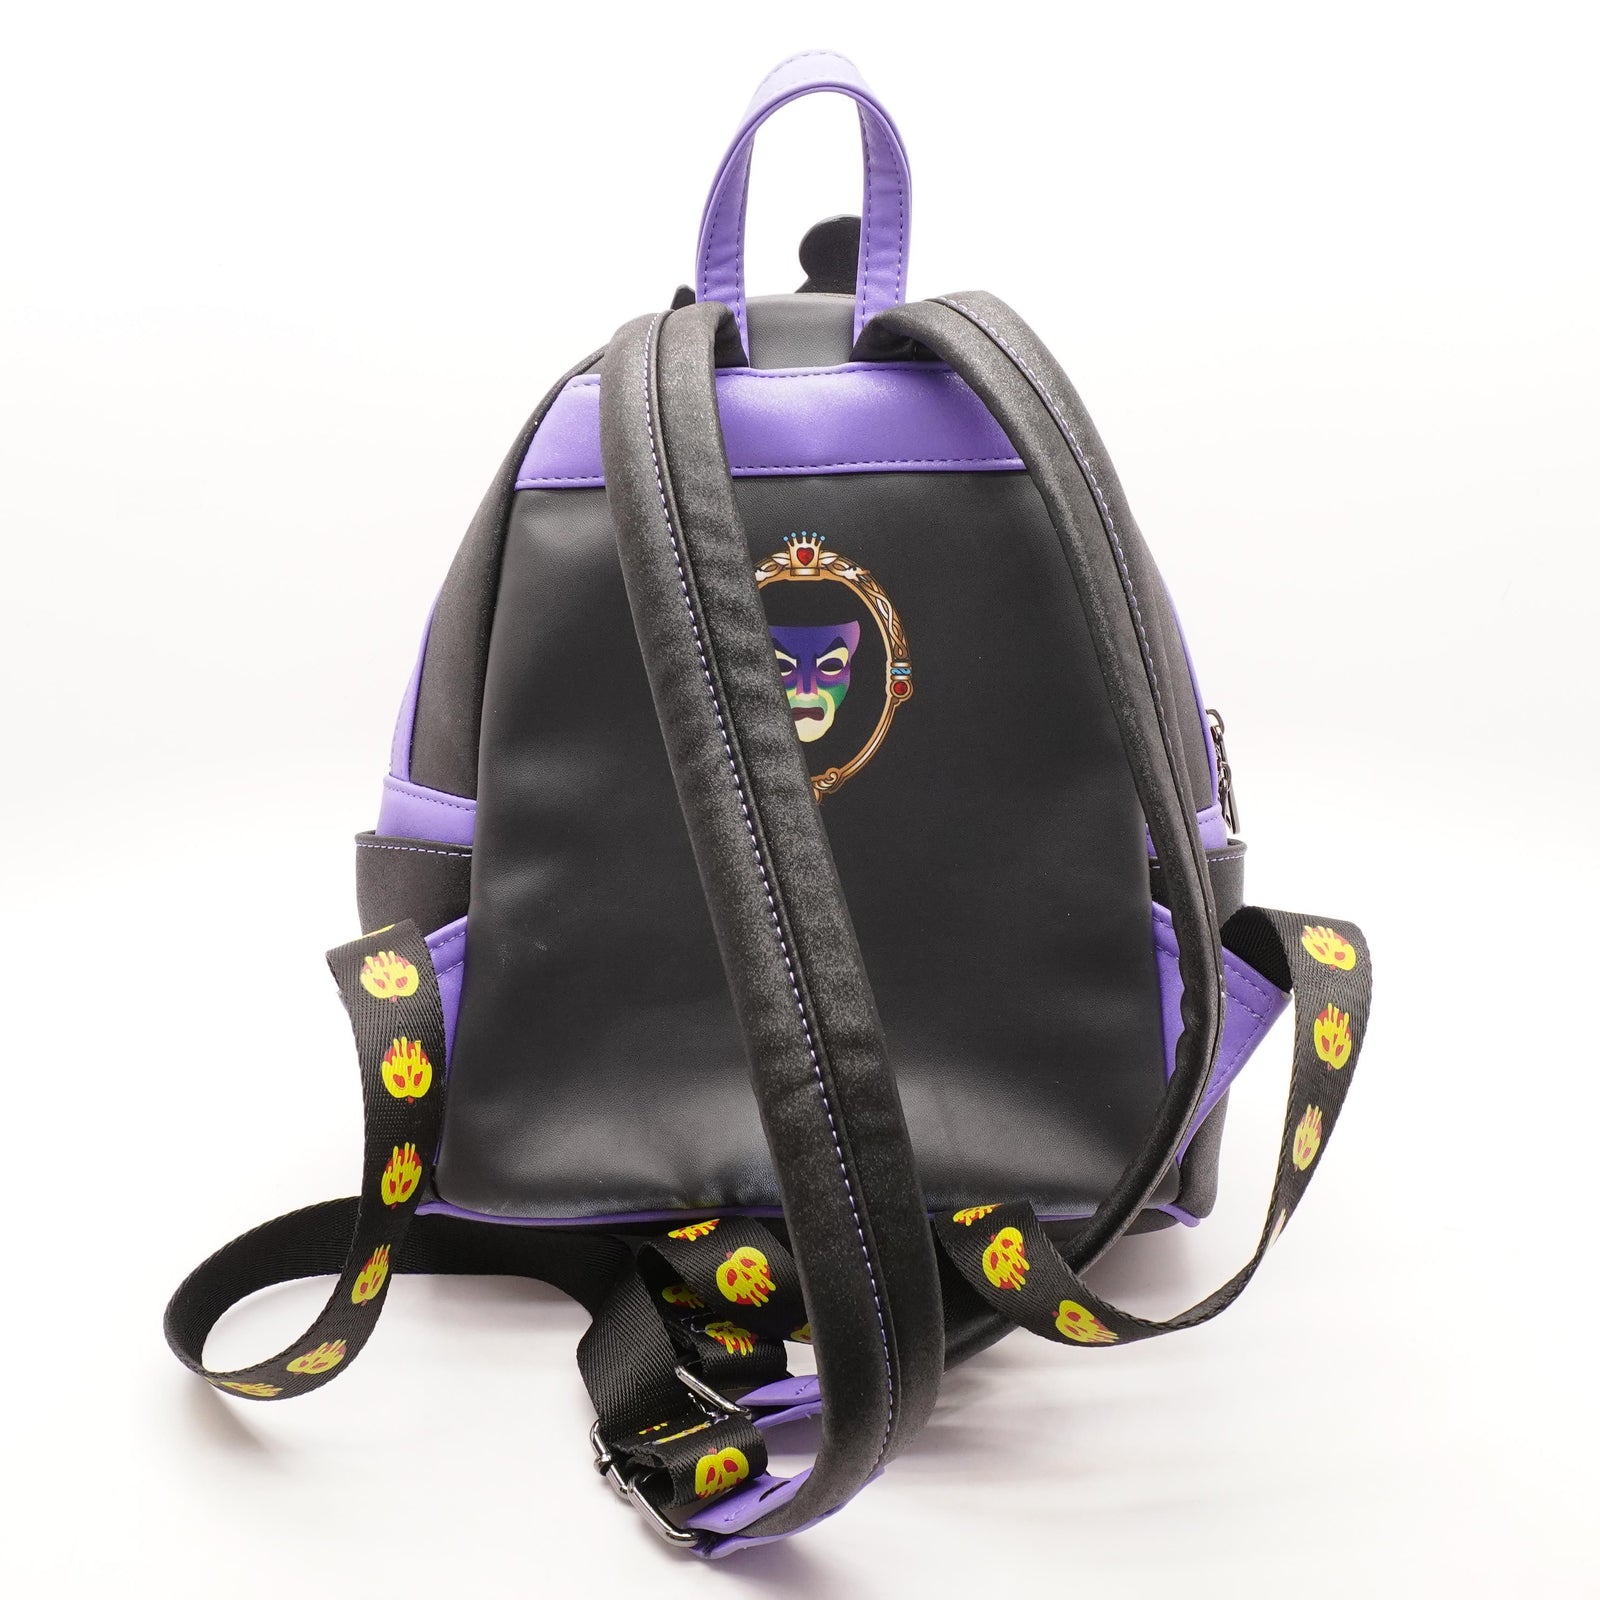 Disney Villains Loungefly Mini Backpack NEW W TAGS Maleficent